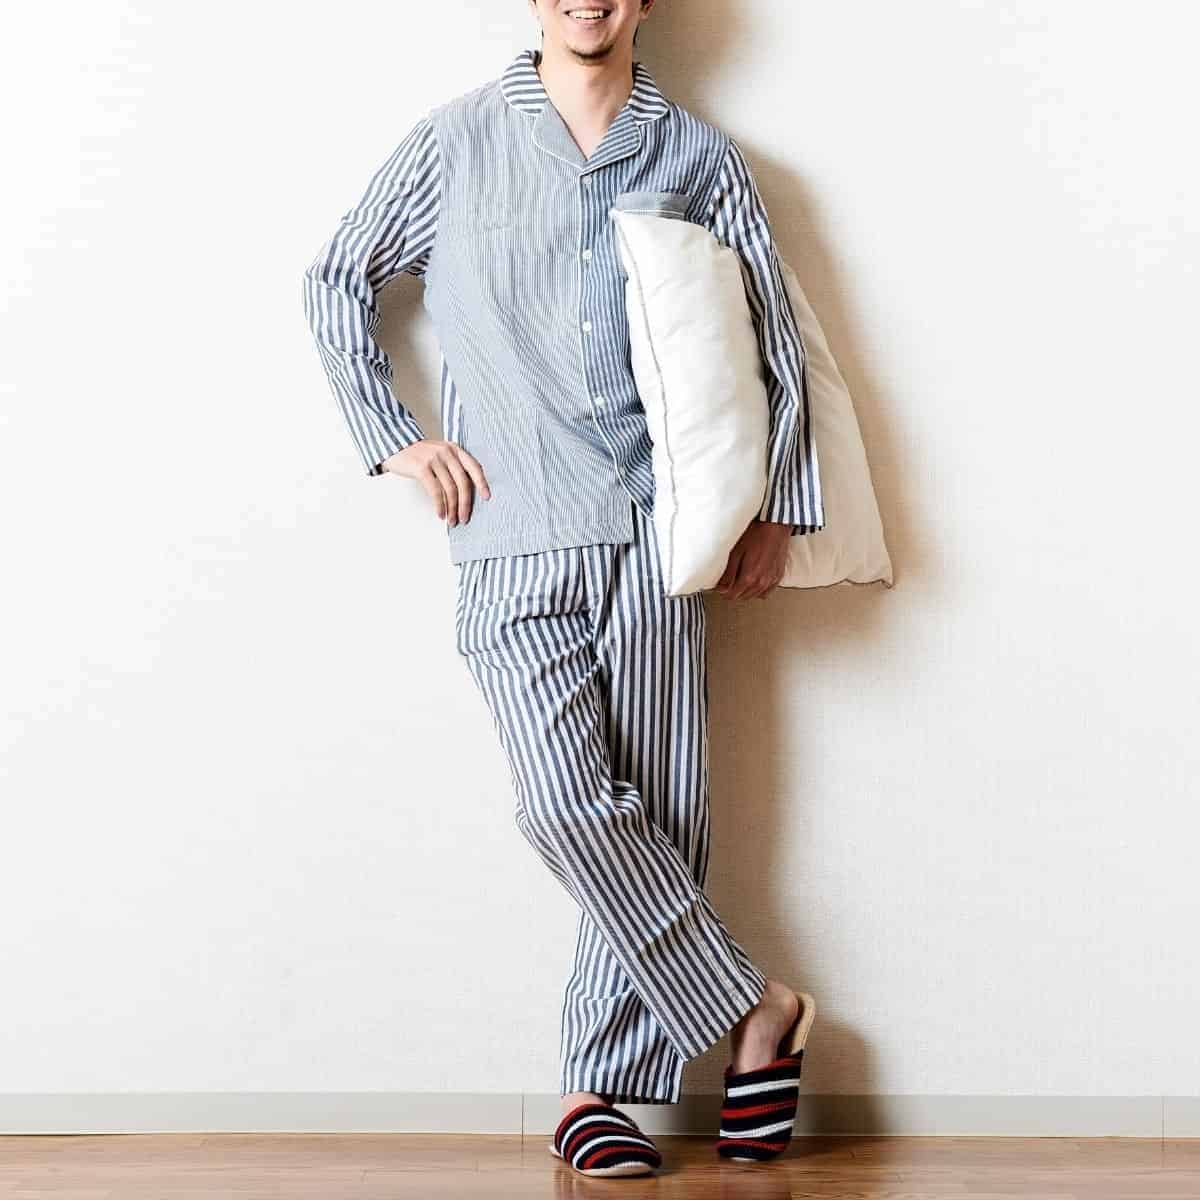 Person wearing pajamas and leaning against a wall with a pillow.